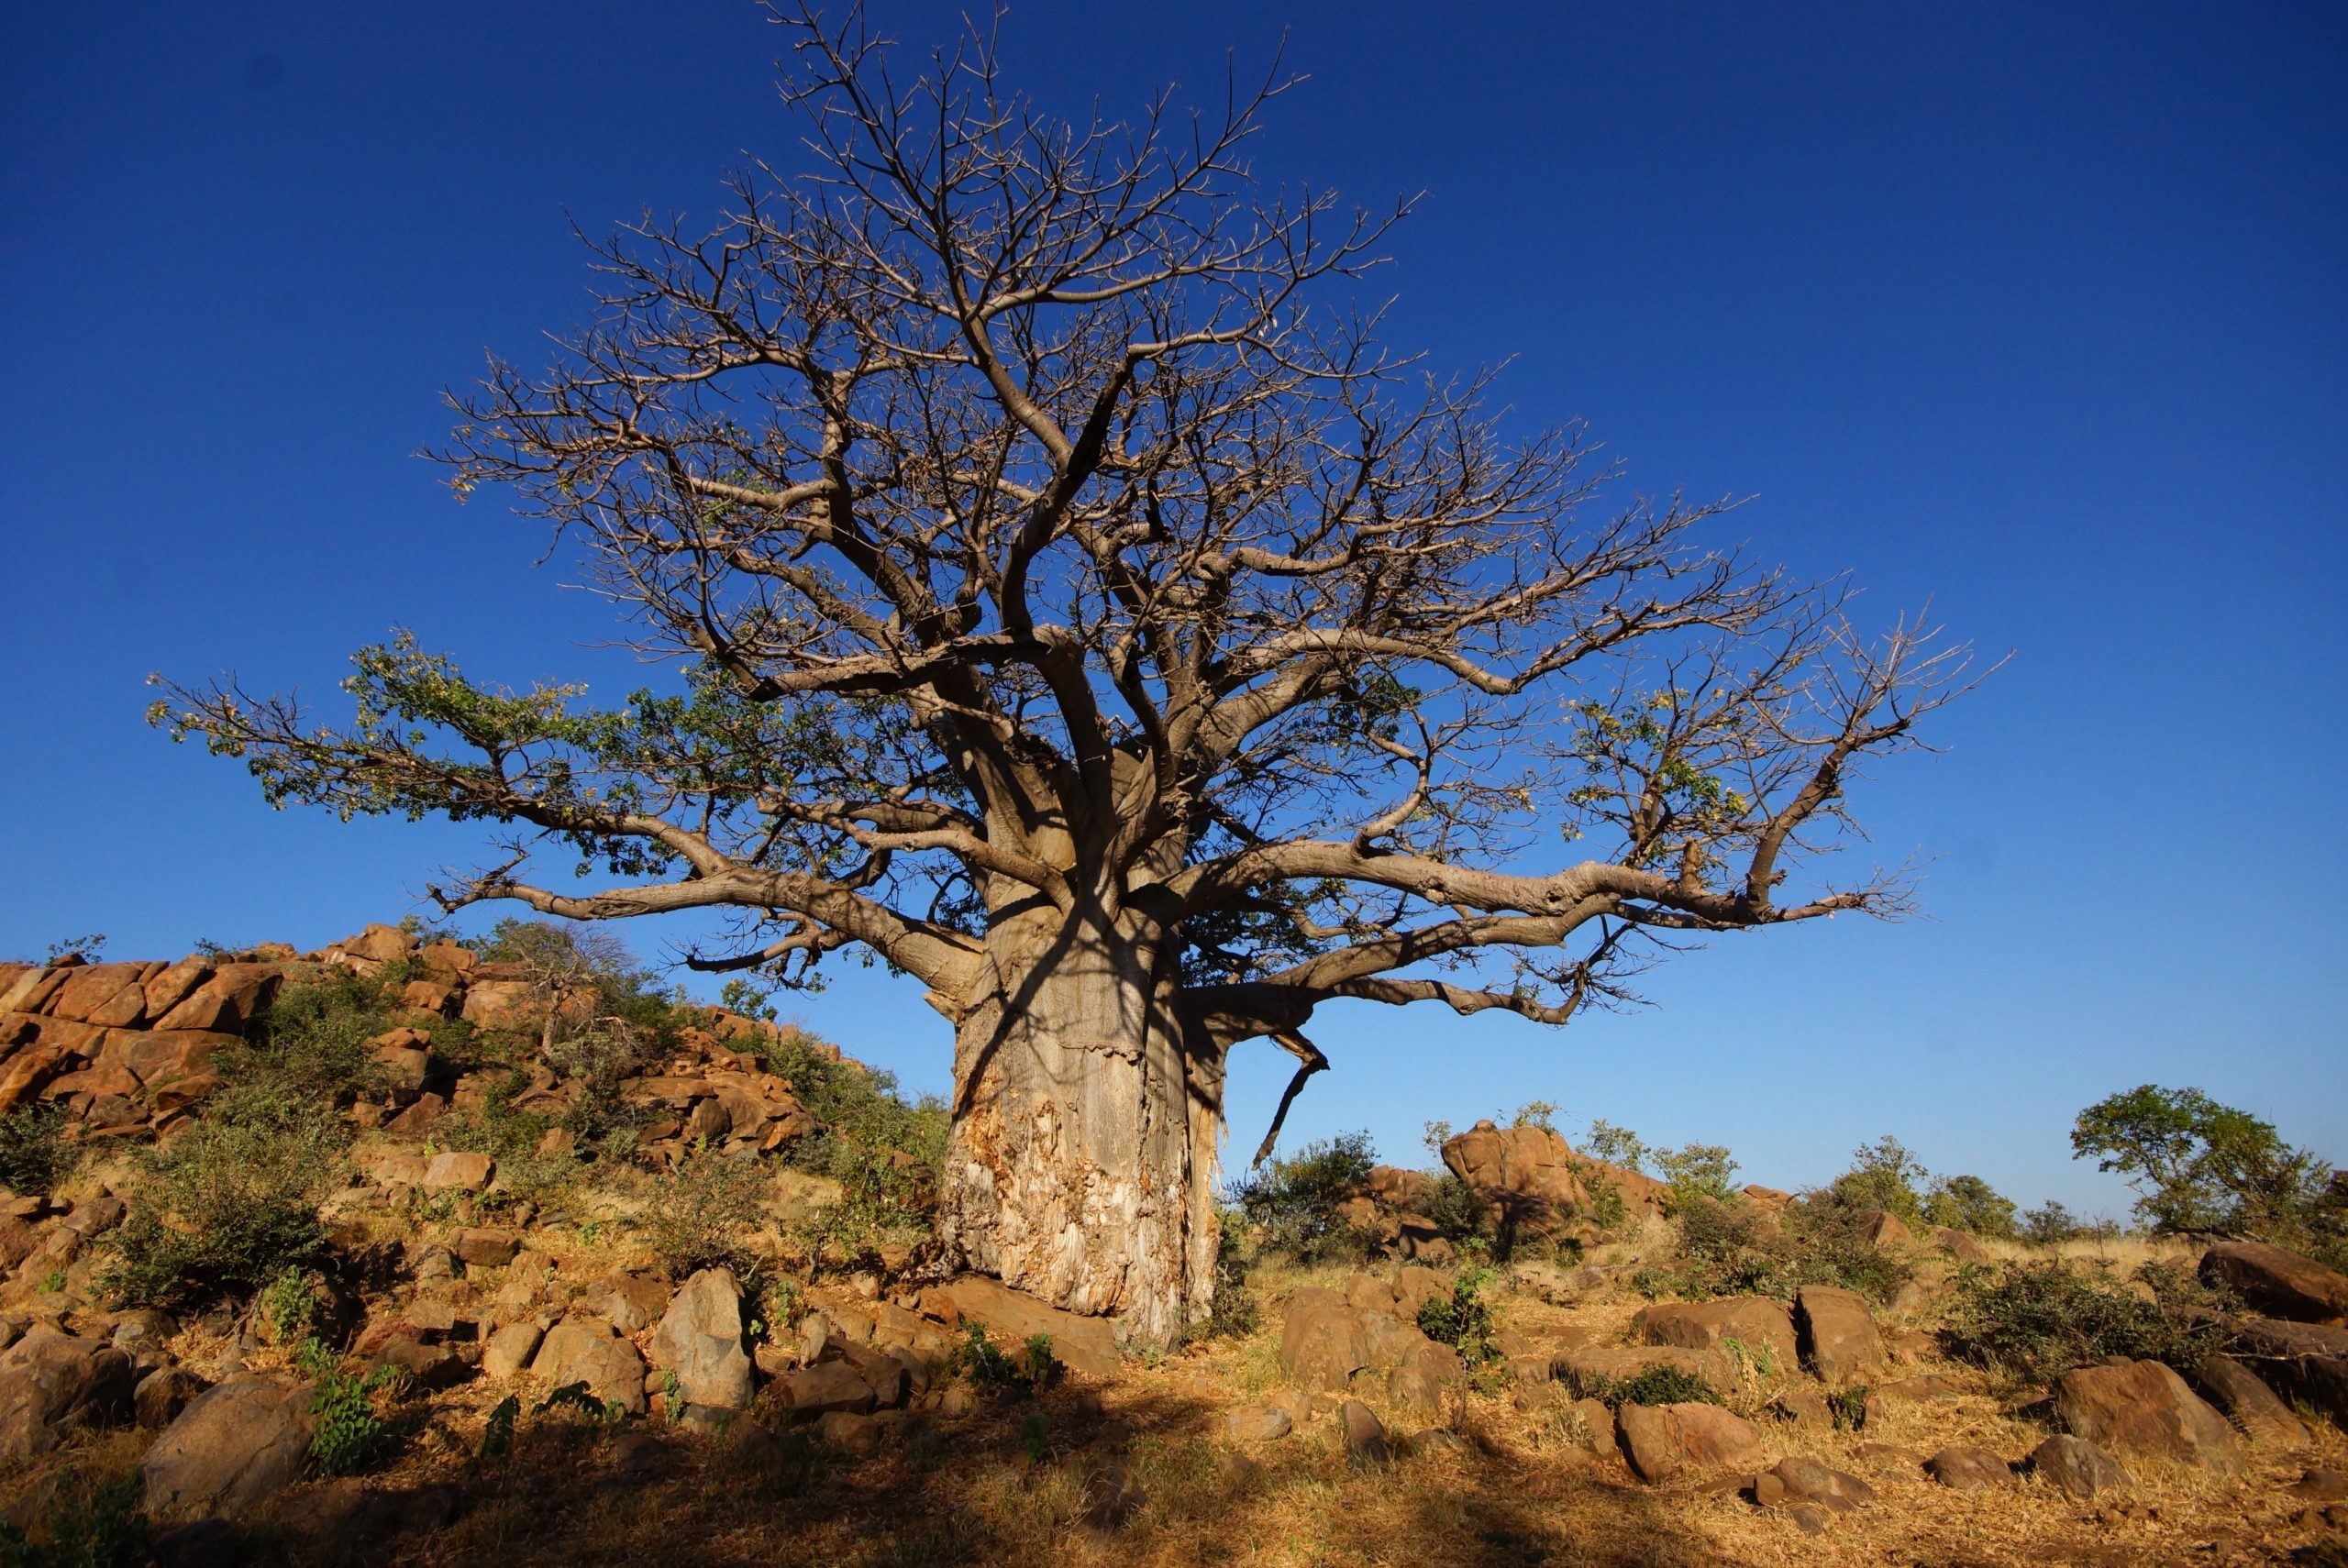 RINGO and the Baobab Tree: A Change-Making Journey of Finding, Learning and Doing